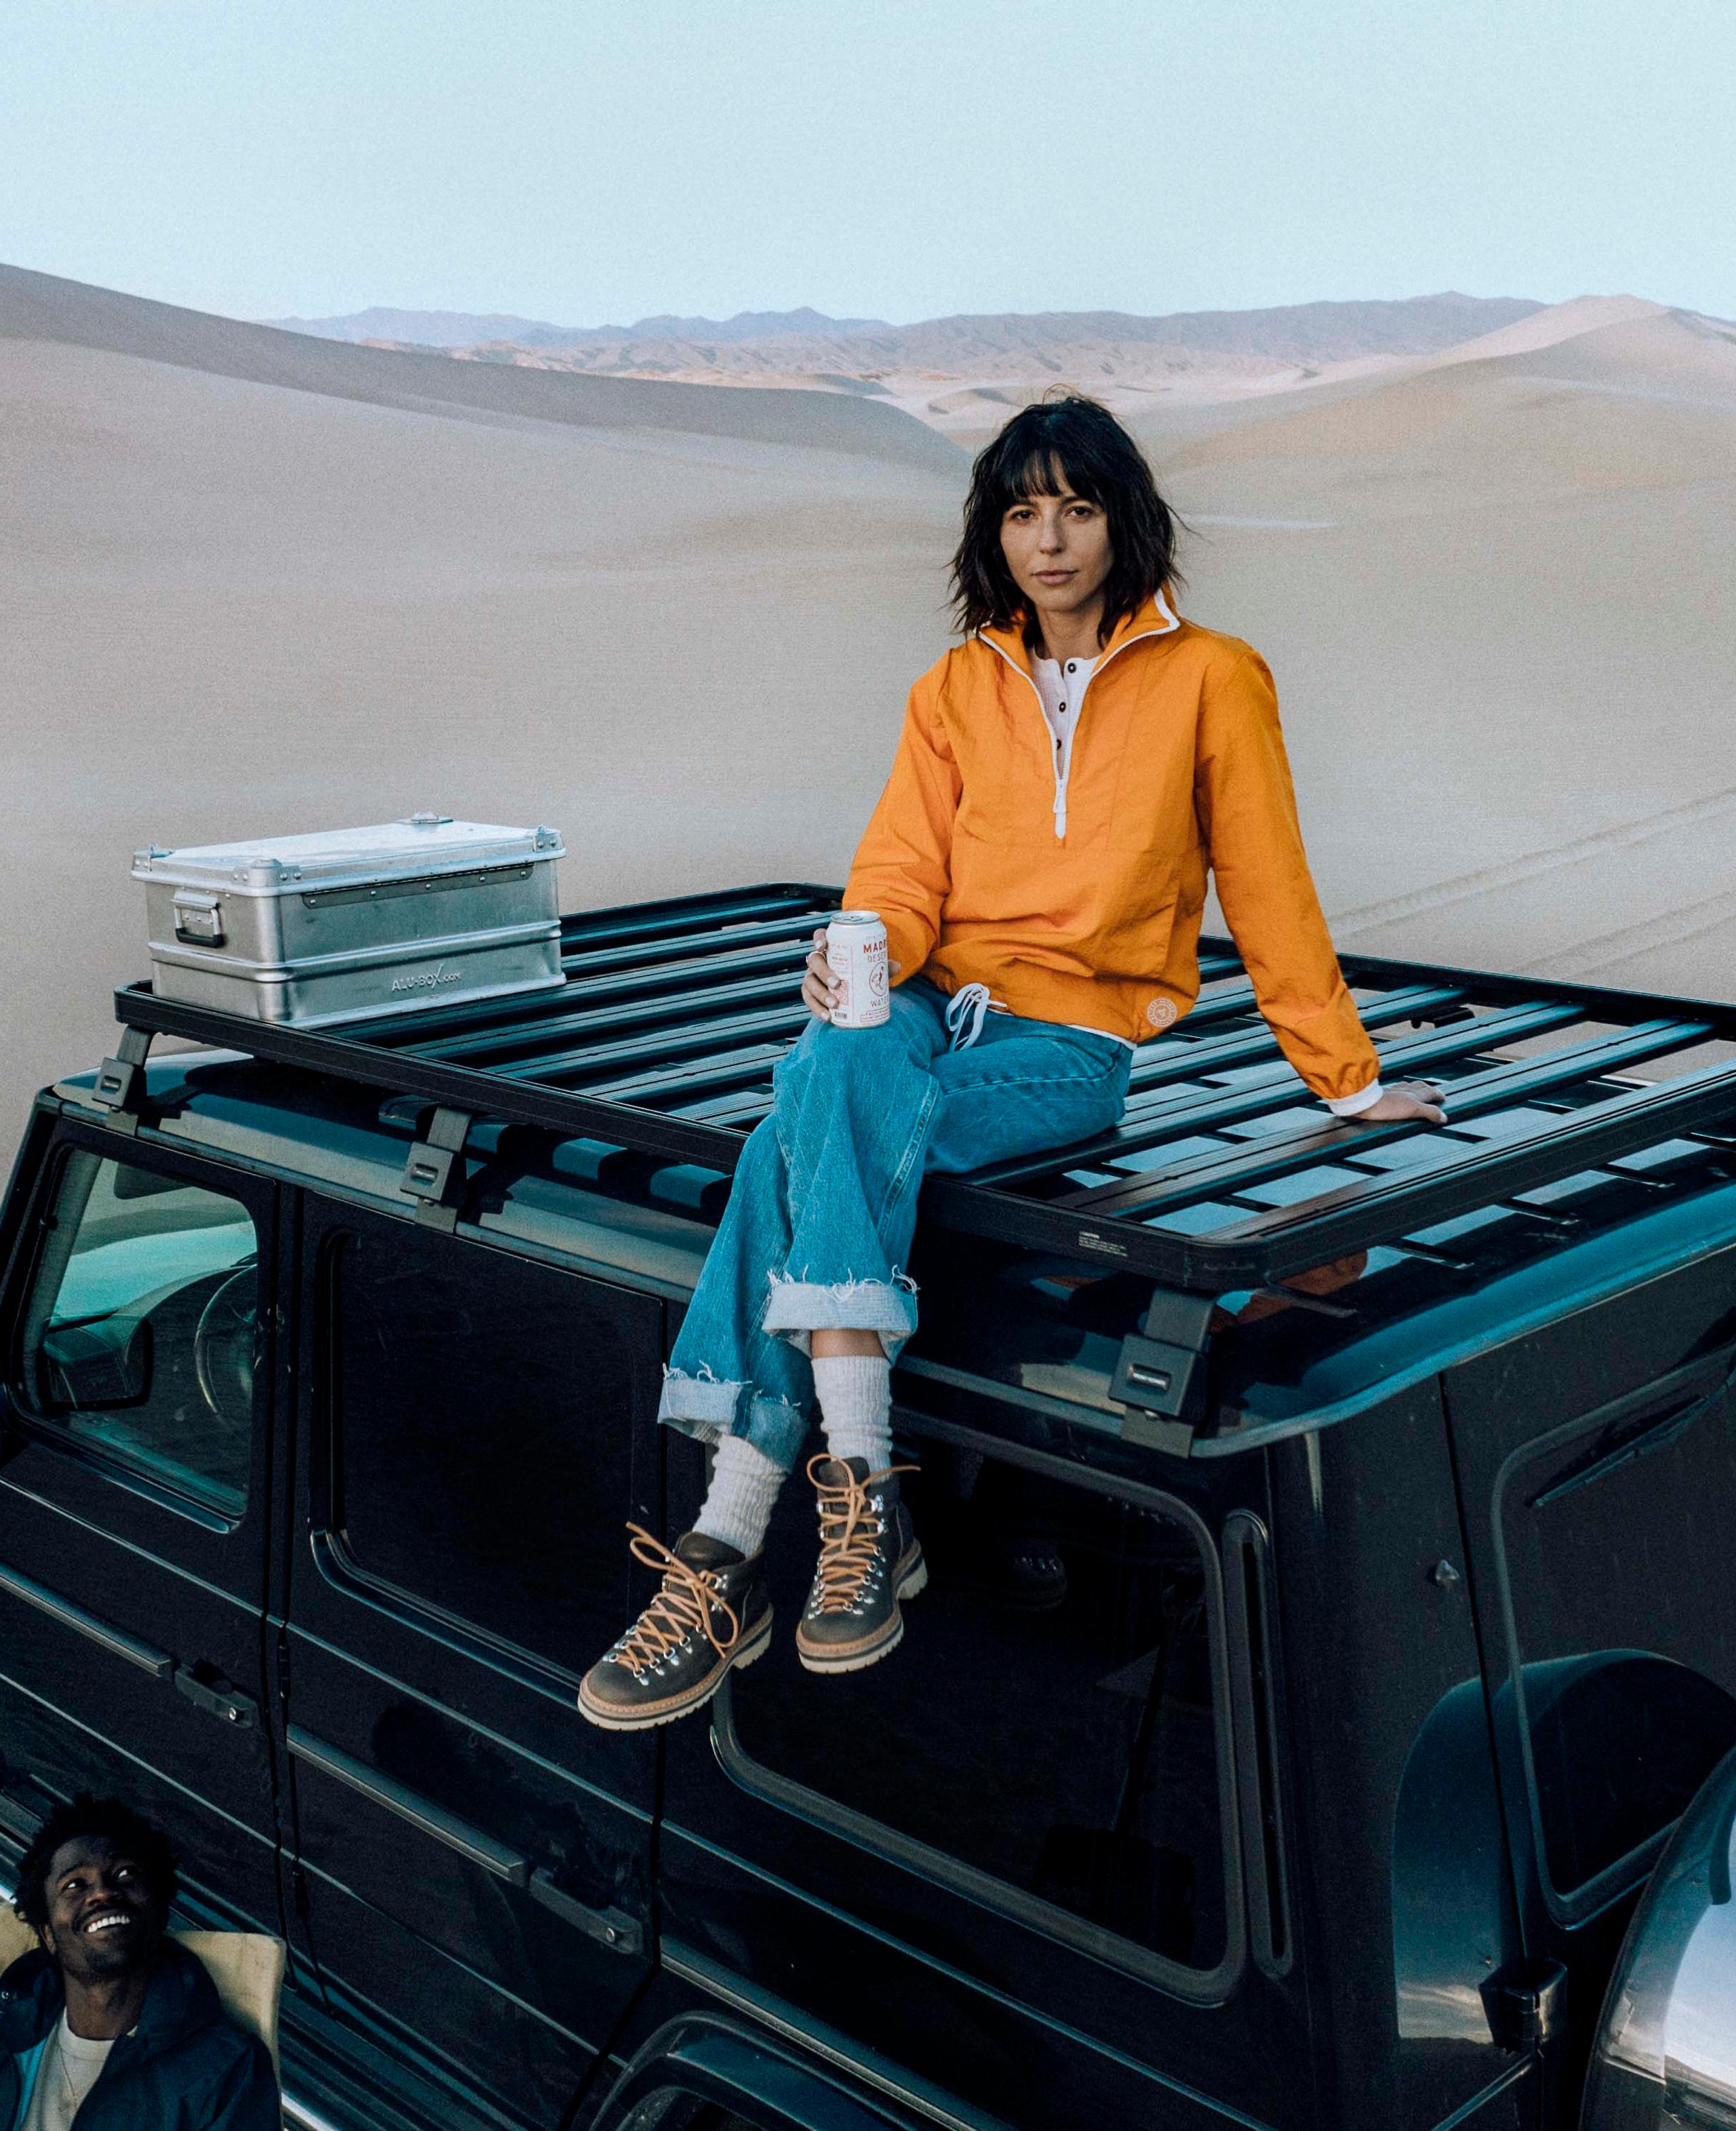 Woman sitting on top of black G wagon truck with sand dune landscape in background